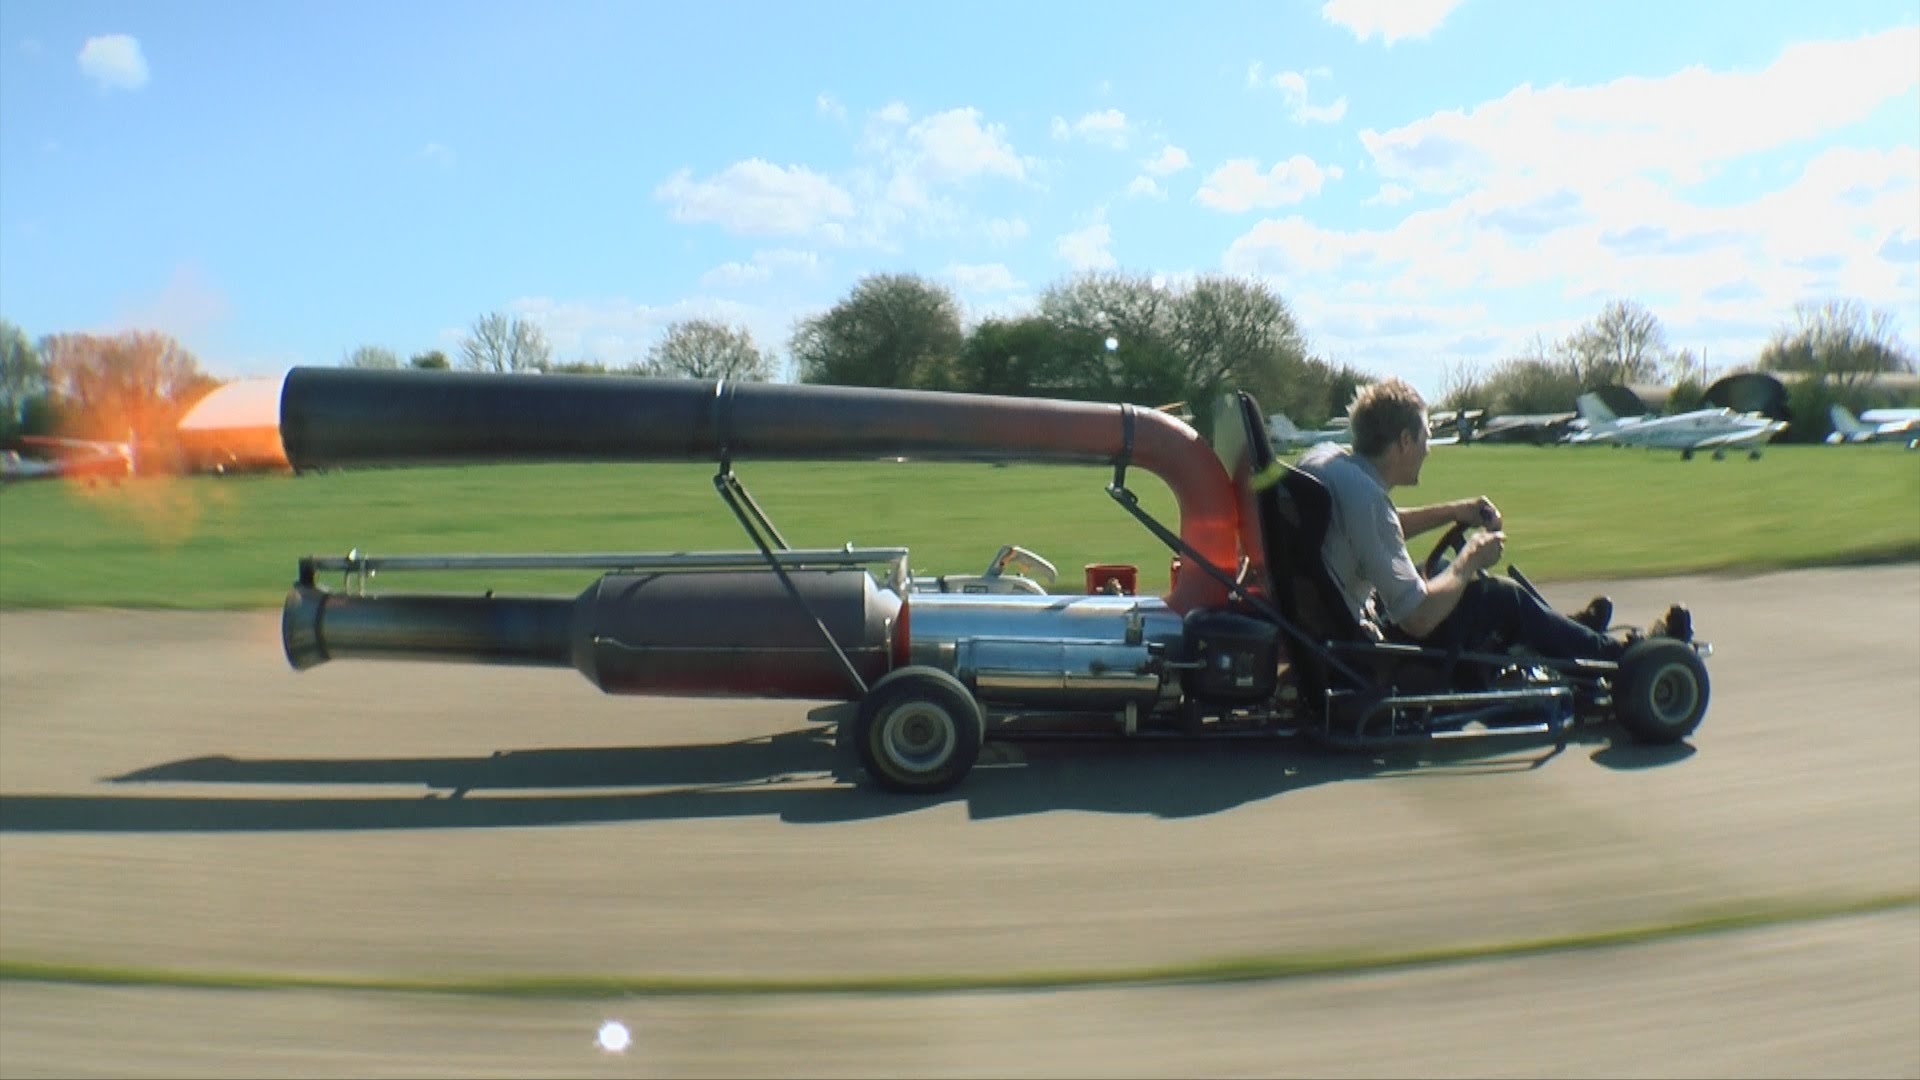 This jet-powered go kart is basically a fire breathing monster on wheels